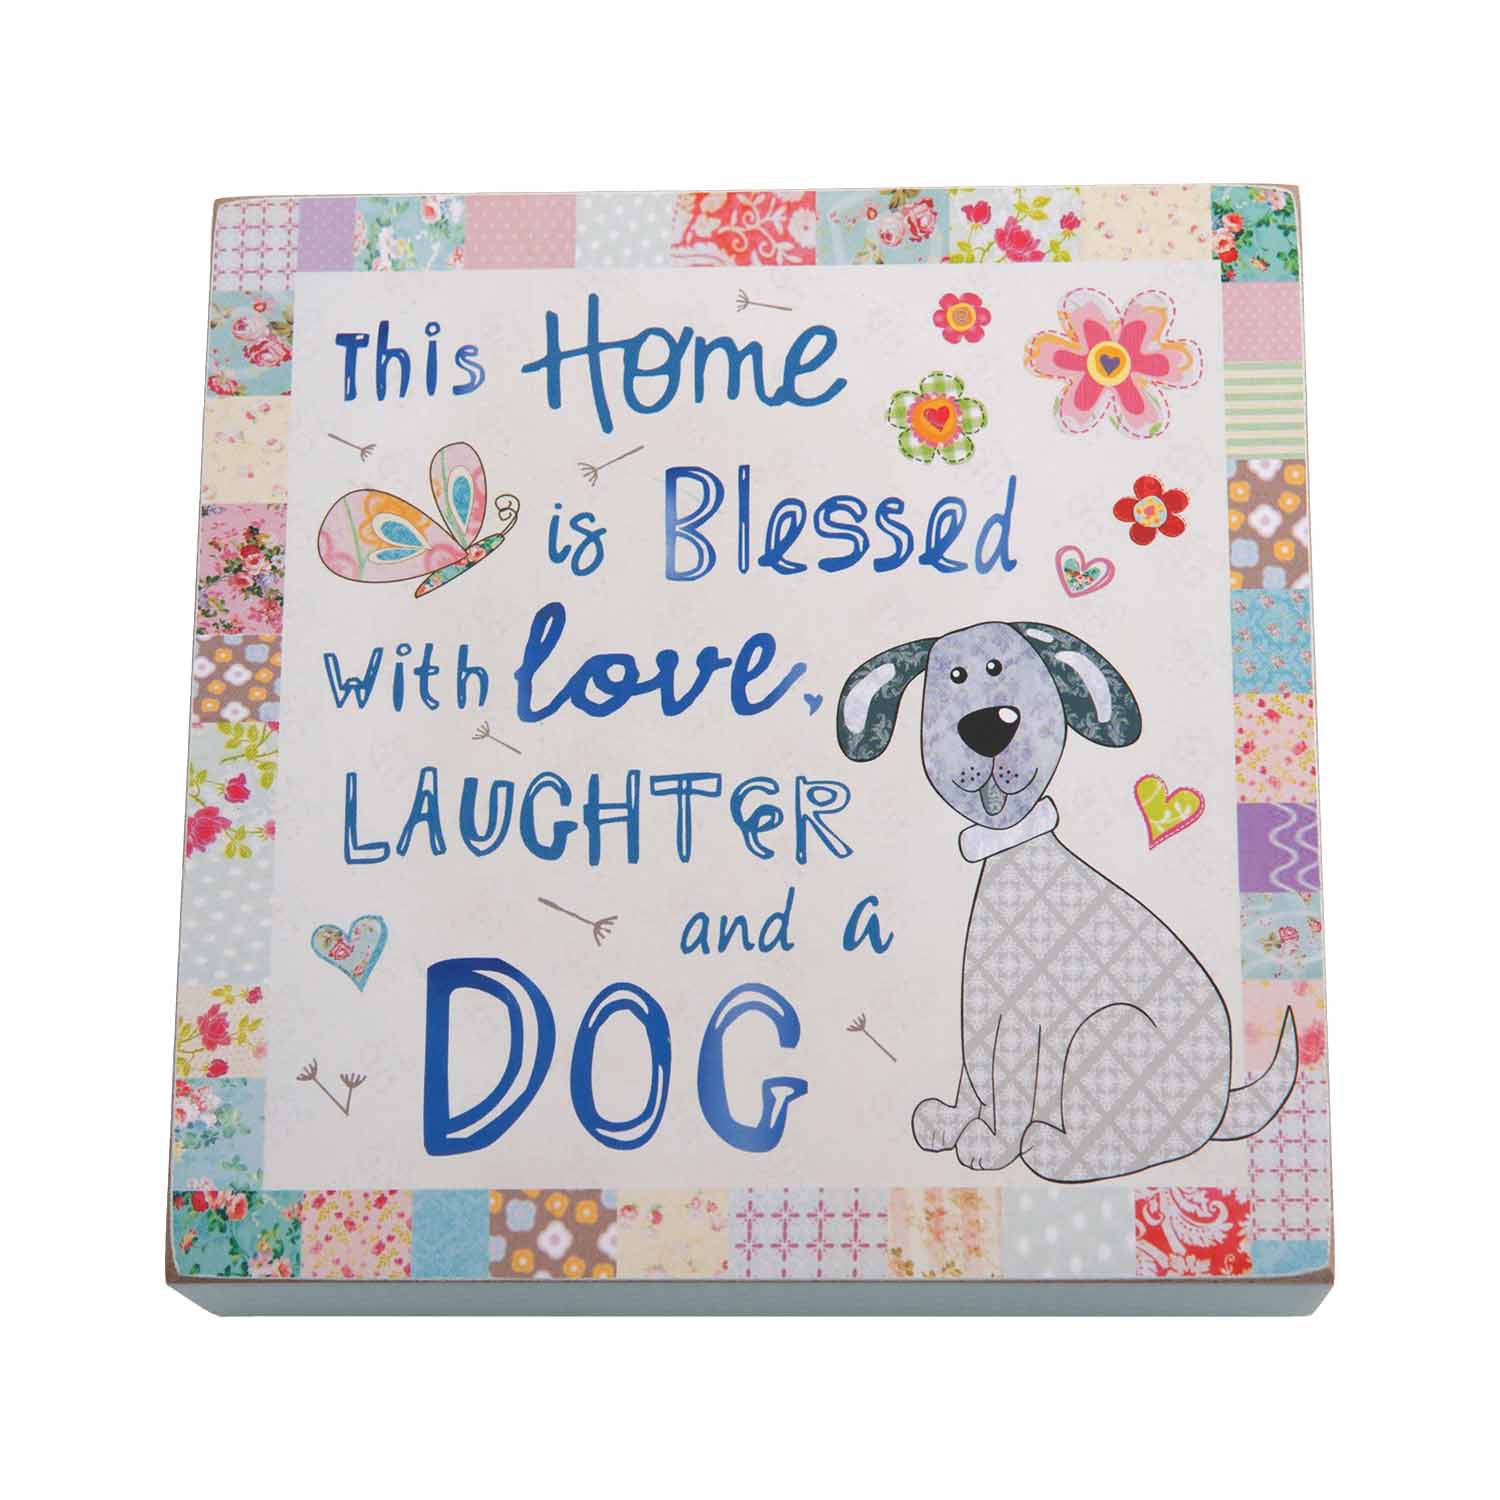 Dog Lover Gifts available at Dog Krazy Gifts – This Home Is Blessed With Love Laughtr And A Dog Art Block Sign, Just Part Of Our Collection Of Signs Available At www.dogkrazygifts.co.uk